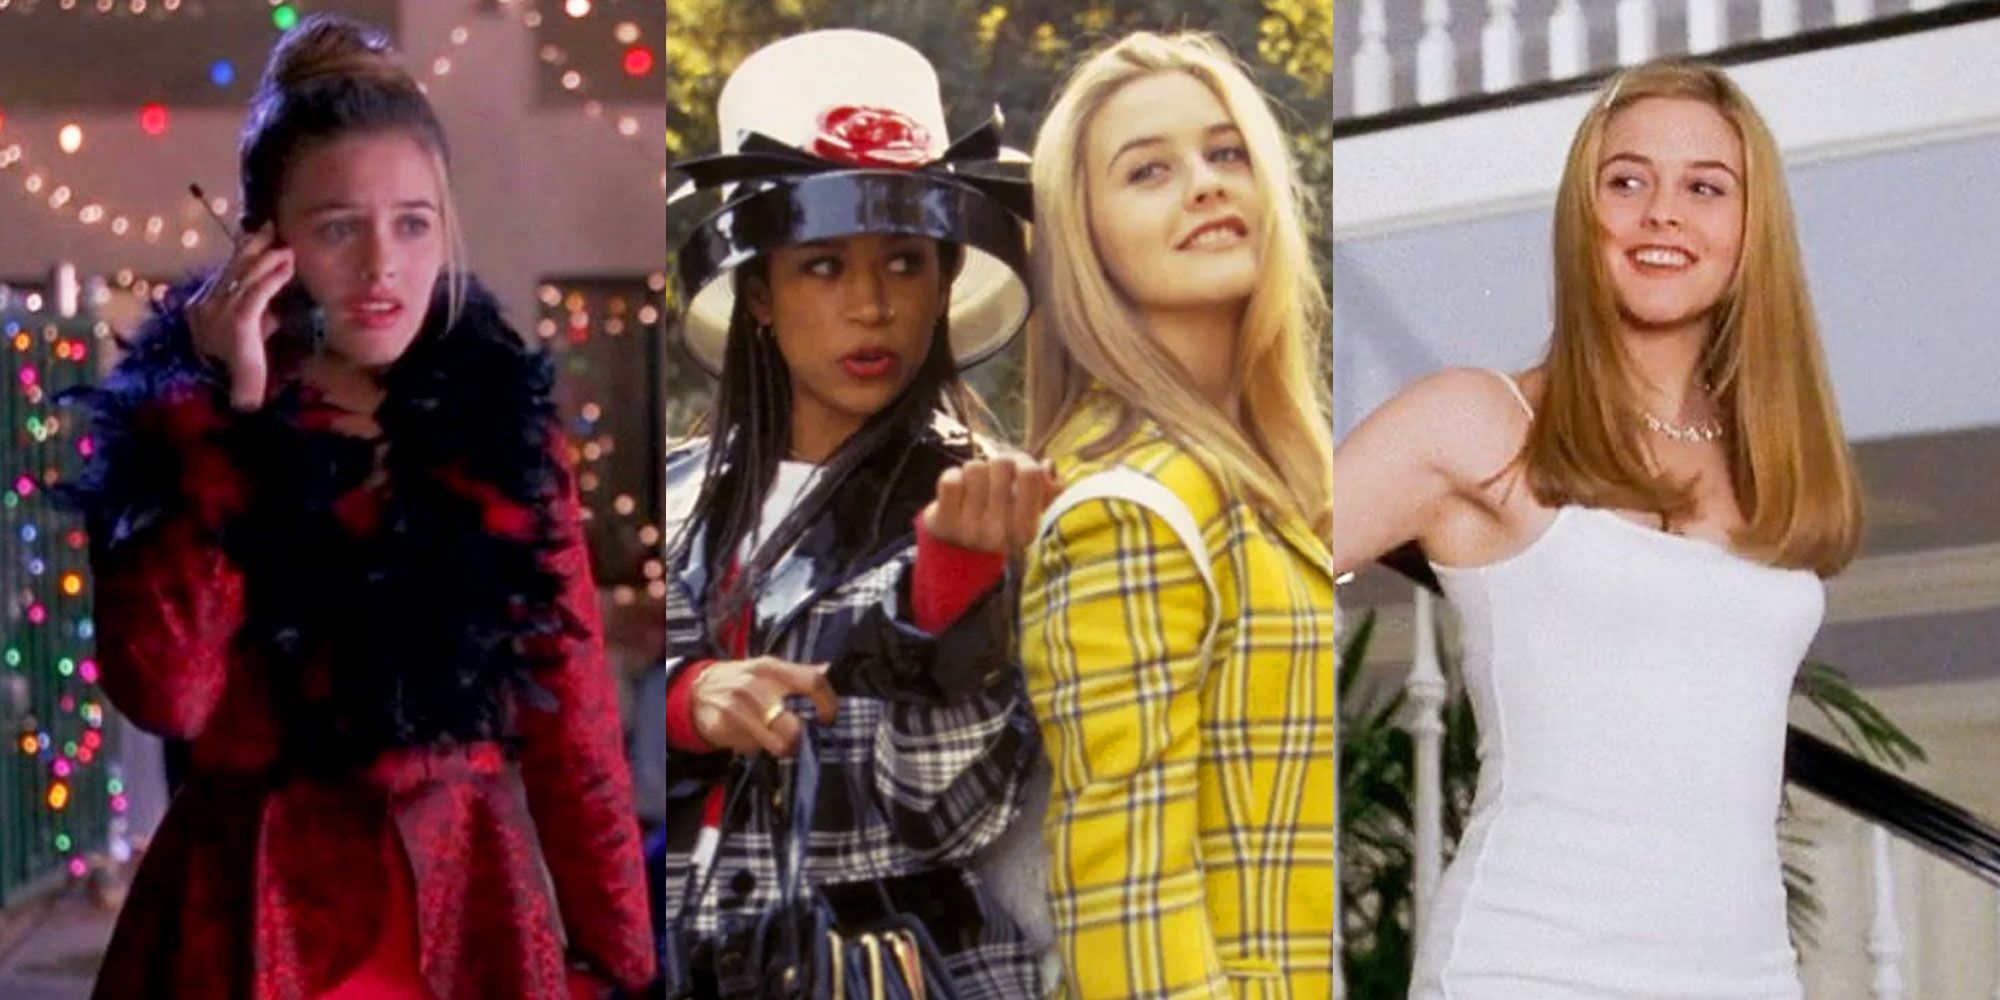 A split image features Cher in her red dress and coat, Dionne and Cher in their plaid suits, and Cher in her white dress in Clueless